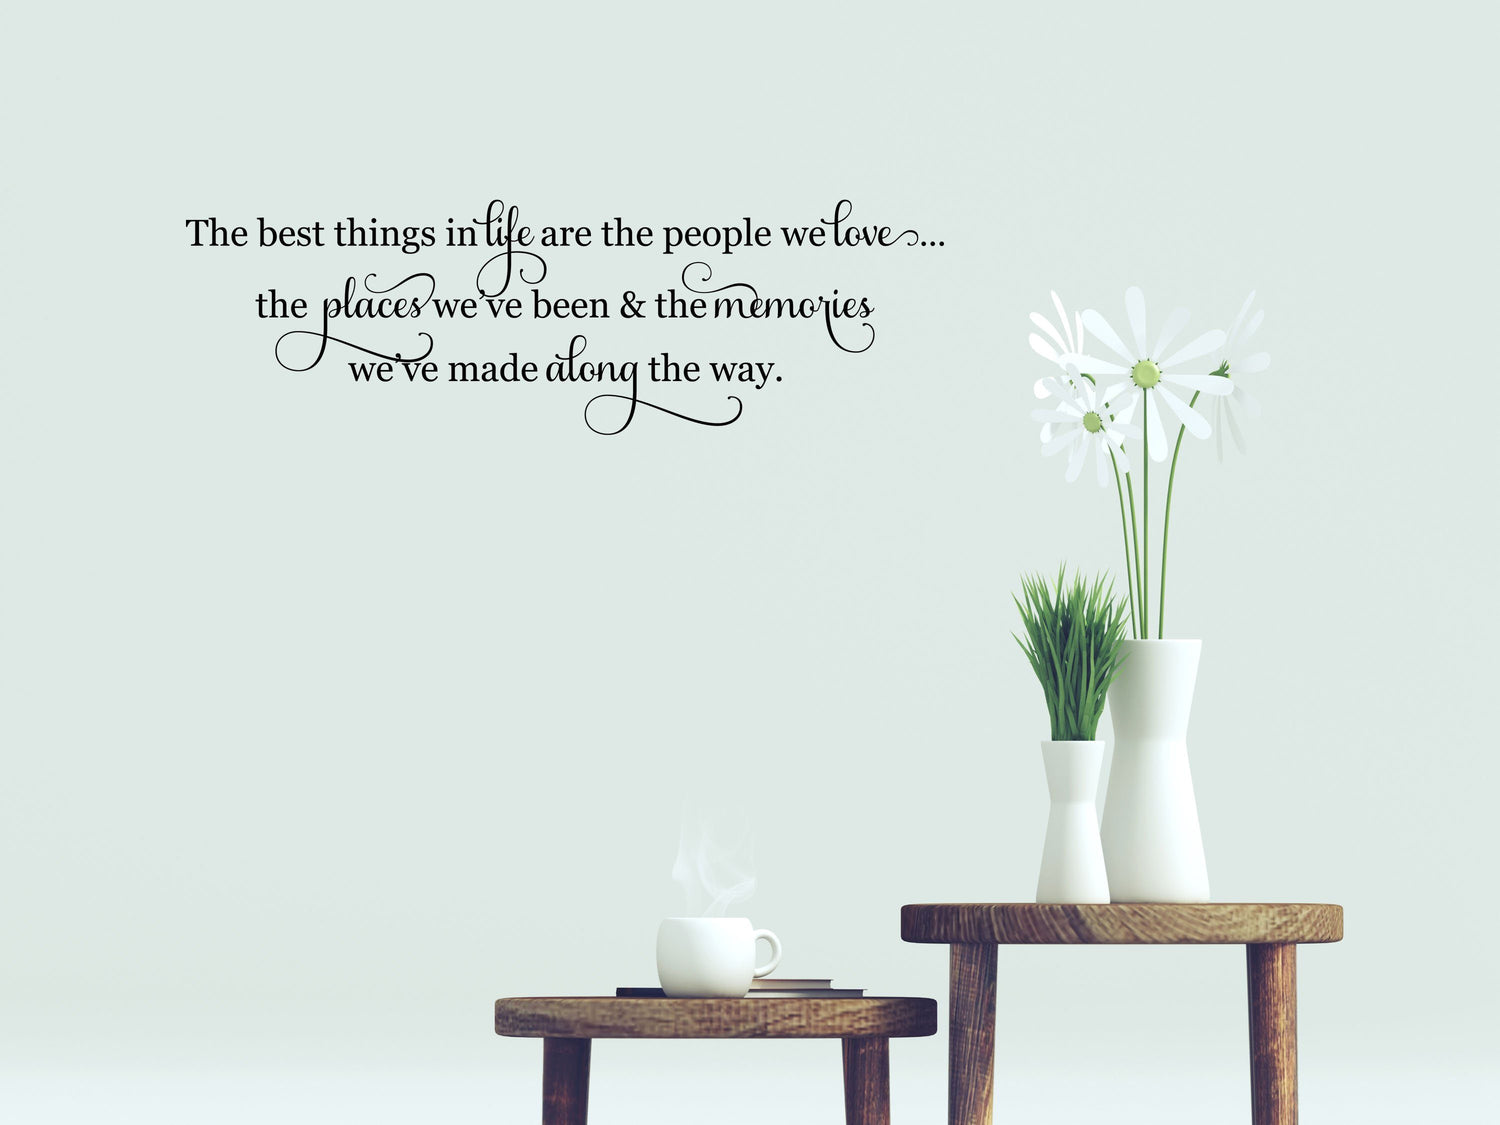 The Best Things In Life - Inspirational Wall Signs Vinyl Wall Decal Done 